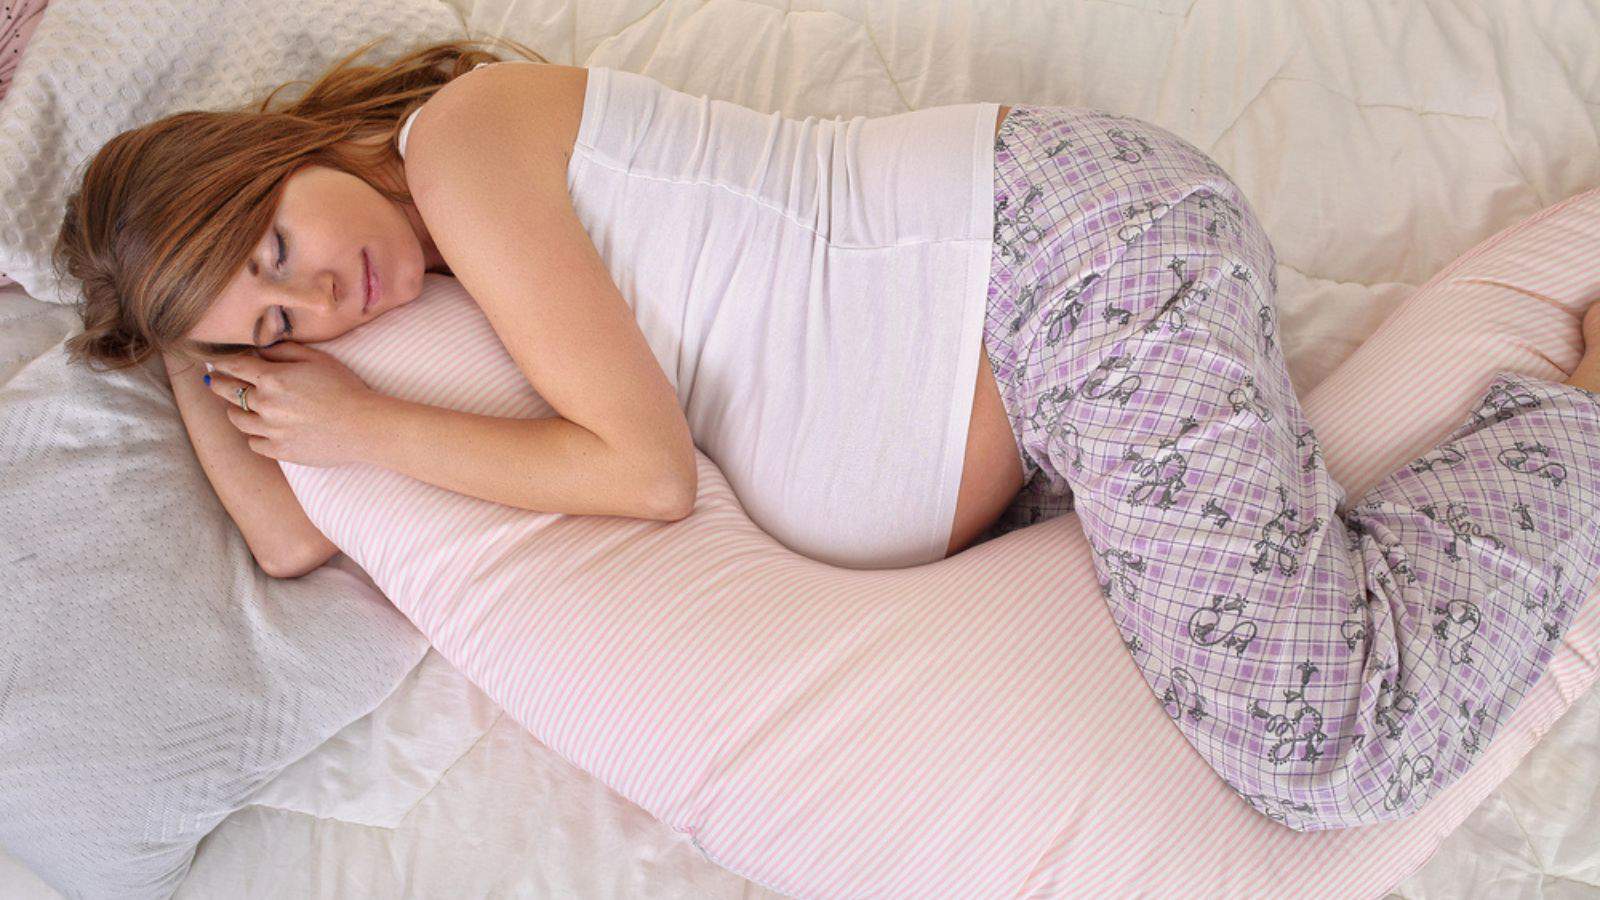 Pregnant woman sleeping peacefully in the bedroom